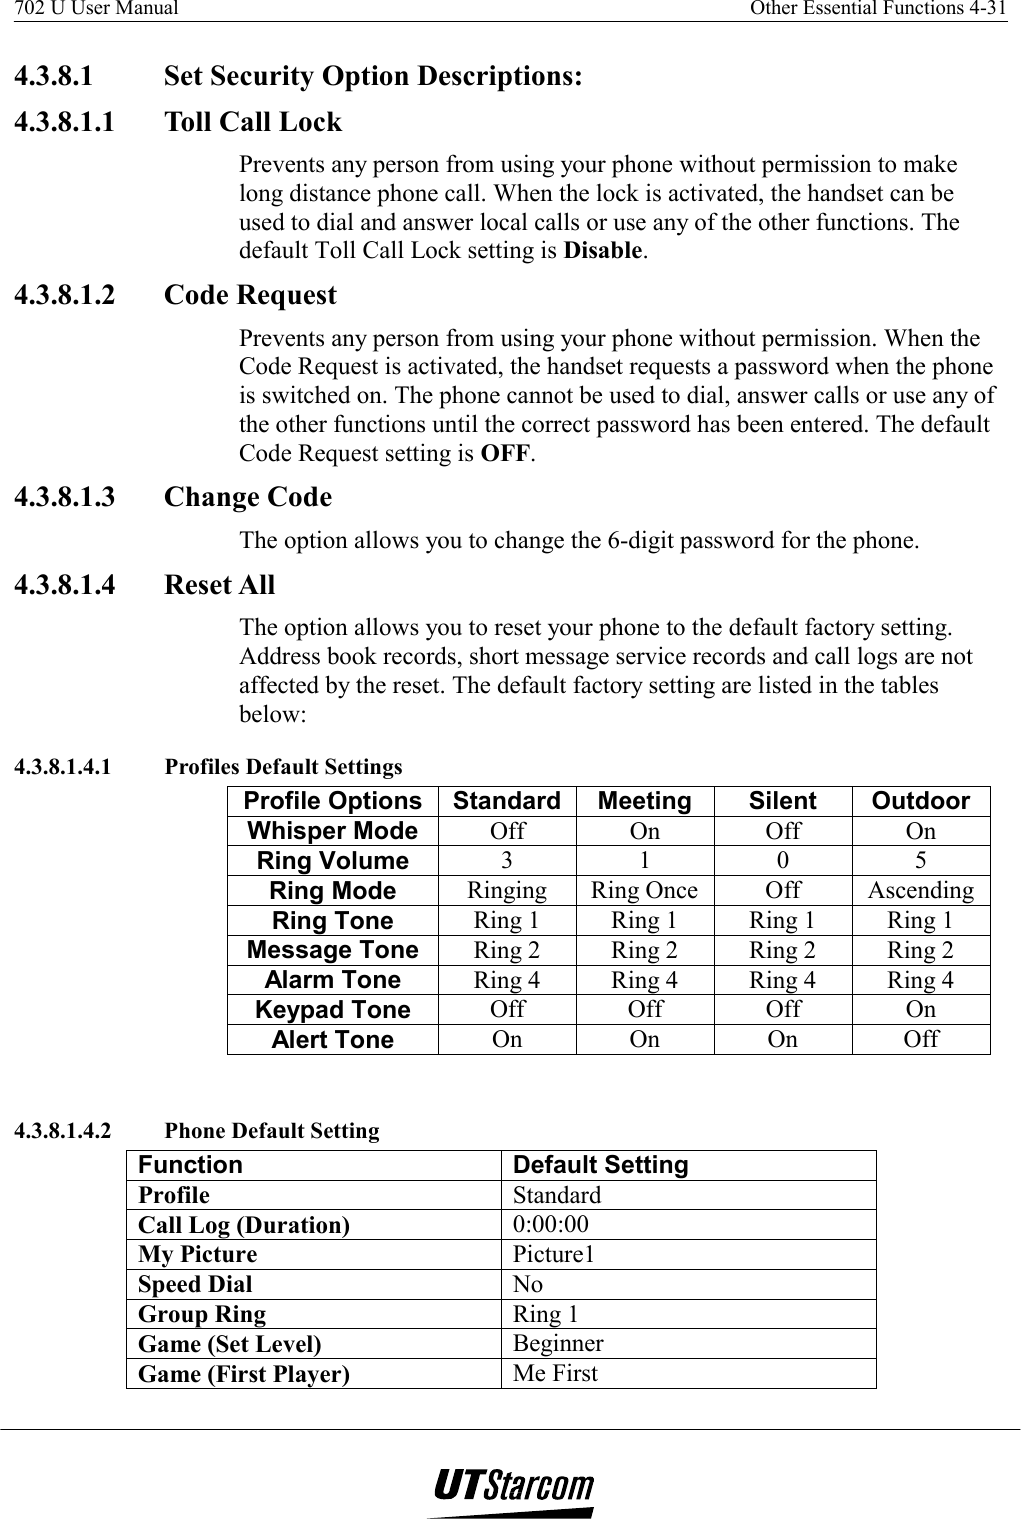 702 U User Manual    Other Essential Functions 4-31   4.3.8.1  Set Security Option Descriptions: 4.3.8.1.1  Toll Call Lock Prevents any person from using your phone without permission to make long distance phone call. When the lock is activated, the handset can be used to dial and answer local calls or use any of the other functions. The default Toll Call Lock setting is Disable. 4.3.8.1.2 Code Request Prevents any person from using your phone without permission. When the Code Request is activated, the handset requests a password when the phone is switched on. The phone cannot be used to dial, answer calls or use any of the other functions until the correct password has been entered. The default Code Request setting is OFF. 4.3.8.1.3 Change Code The option allows you to change the 6-digit password for the phone. 4.3.8.1.4 Reset All The option allows you to reset your phone to the default factory setting. Address book records, short message service records and call logs are not affected by the reset. The default factory setting are listed in the tables below: 4.3.8.1.4.1  Profiles Default Settings Profile Options  Standard  Meeting  Silent  Outdoor Whisper Mode  Off On Off On Ring Volume  3 1 0 5 Ring Mode  Ringing Ring Once  Off  Ascending Ring Tone  Ring 1  Ring 1  Ring 1  Ring 1 Message Tone  Ring 2  Ring 2  Ring 2  Ring 2 Alarm Tone  Ring 4  Ring 4  Ring 4  Ring 4 Keypad Tone  Off Off Off On Alert Tone  On On On Off  4.3.8.1.4.2  Phone Default Setting Function Default Setting Profile  Standard Call Log (Duration)  0:00:00 My Picture  Picture1 Speed Dial  No Group Ring  Ring 1 Game (Set Level)  Beginner Game (First Player)  Me First 